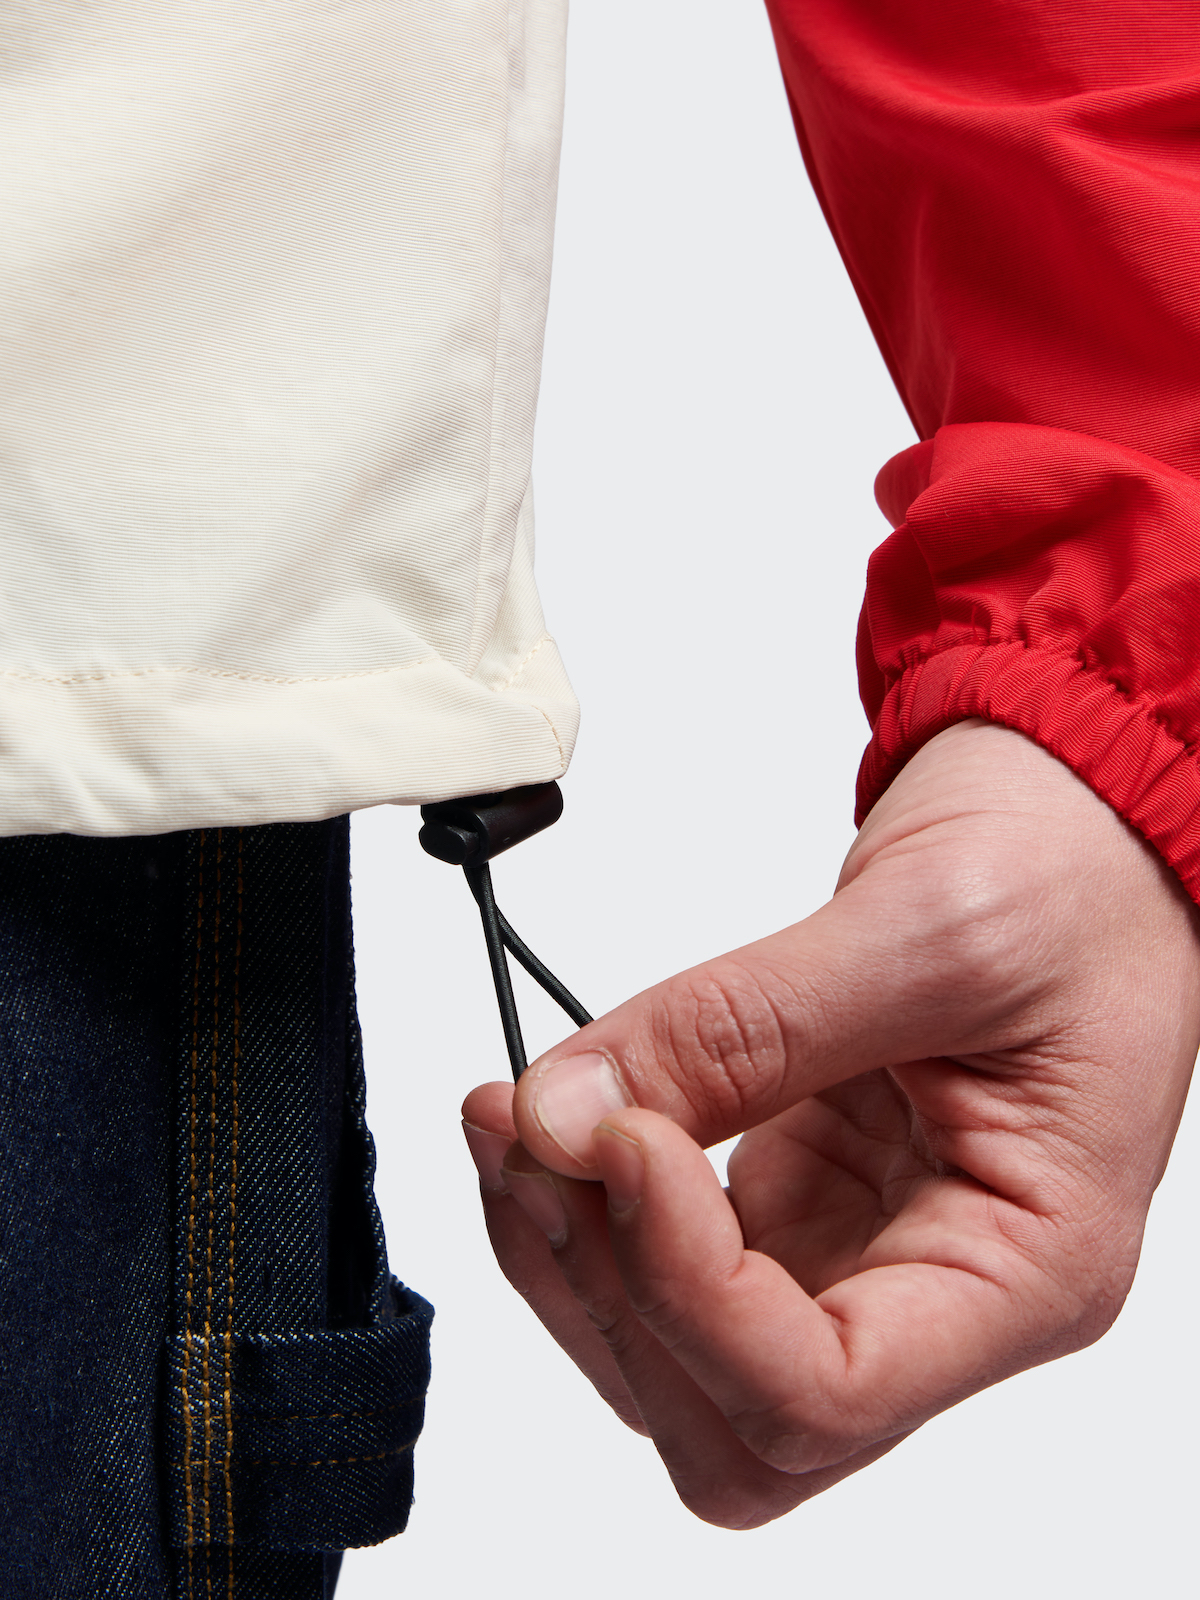 Close-up of a person tightening the drawstring on a hooded jacket